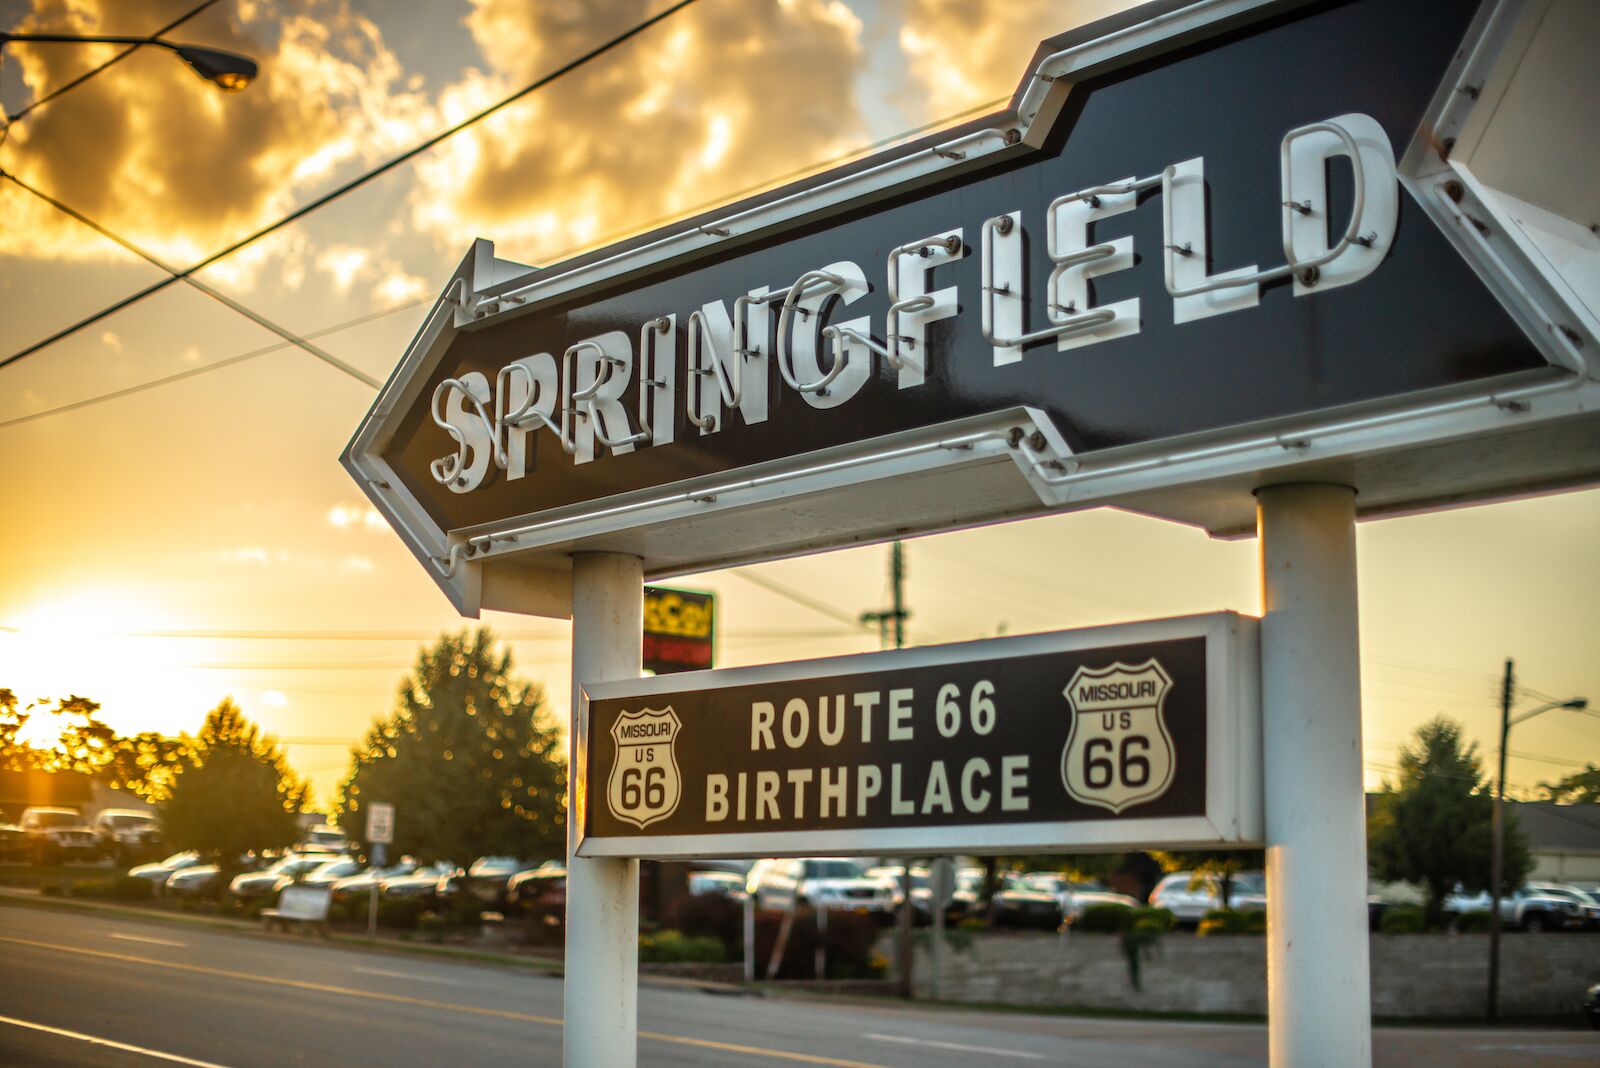 Ozarks road trip: Springfield is a must-see town along the way